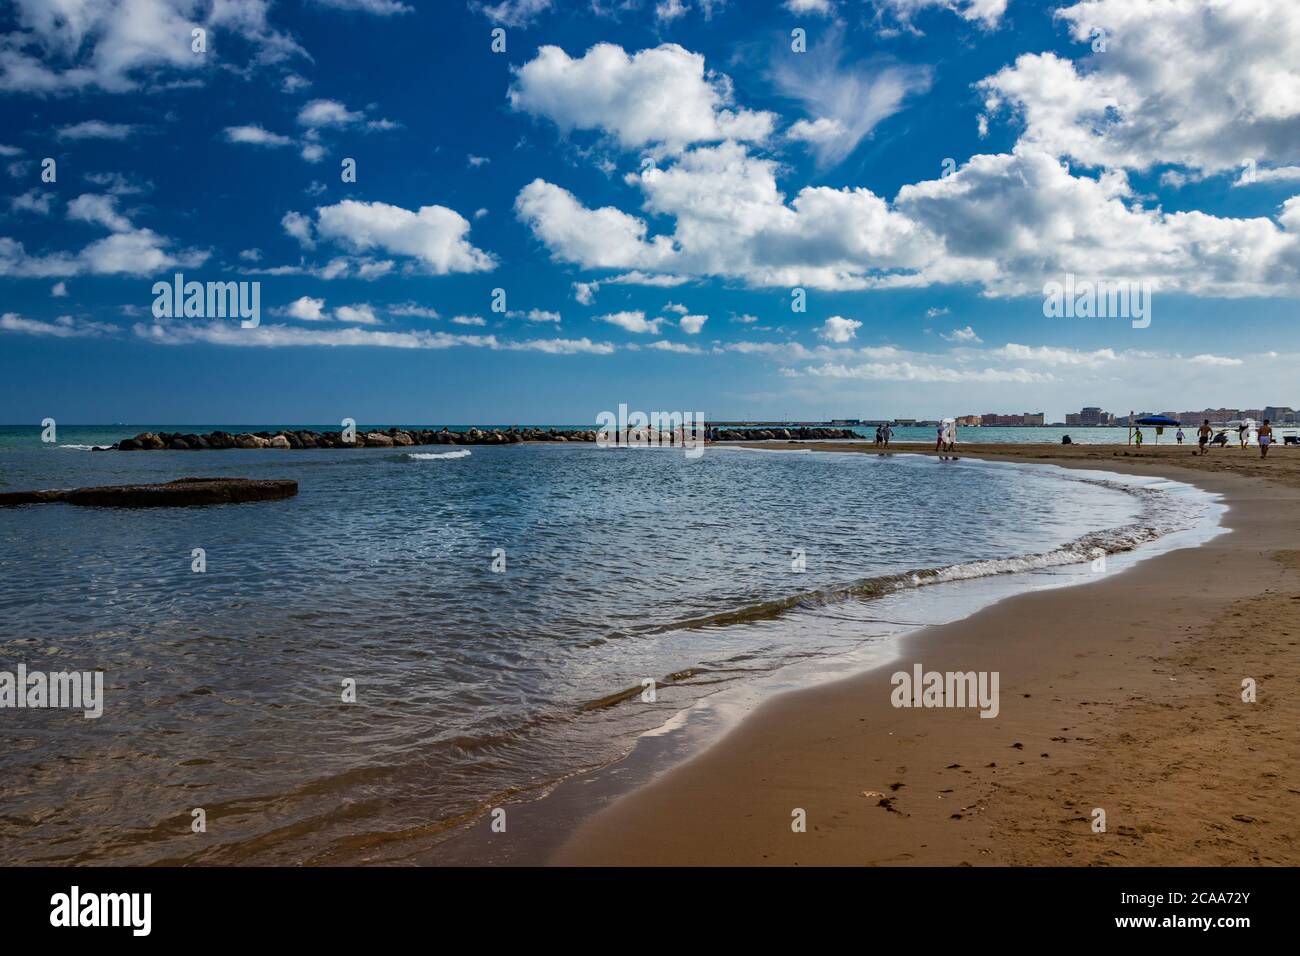 Nettuno, Lazio, Rome, Italy. Some people walk, play and relax on the shore, on the beach of the Roman sea. Backlit. Reflections of light on the water. Stock Photo